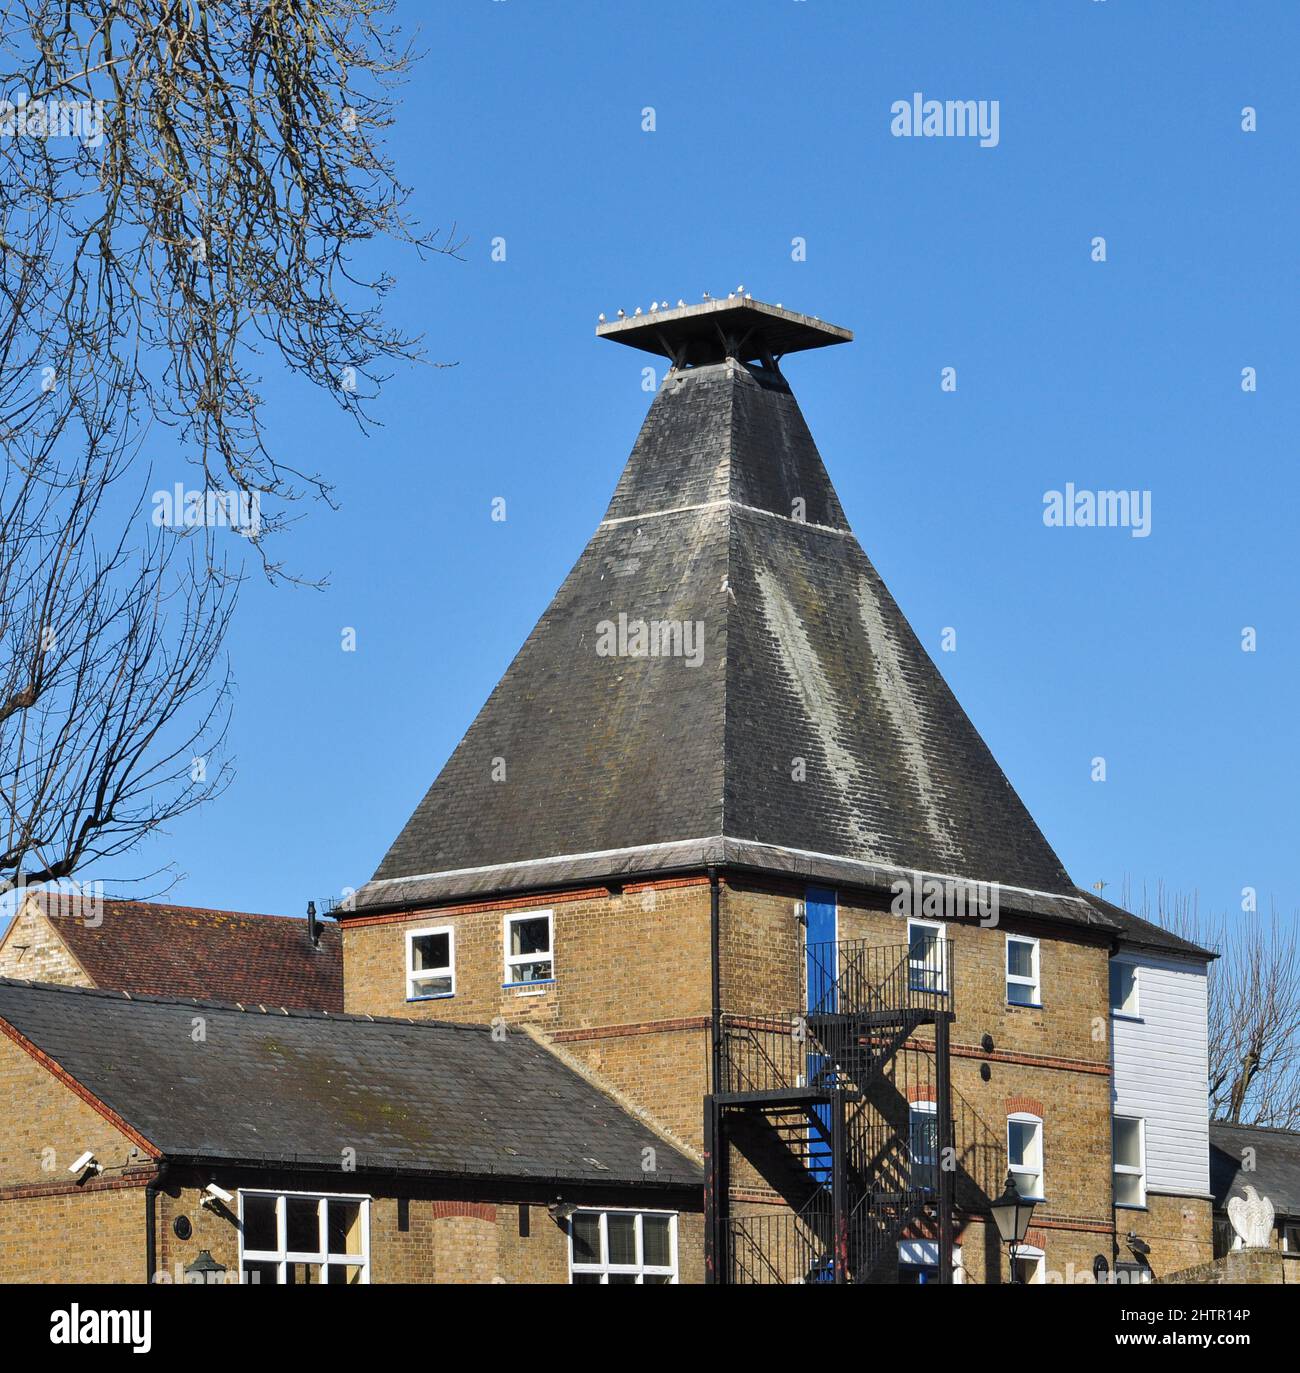 Old Maltings close to the River Lea, Ware, Hertfordshire, England, UK Stock Photo